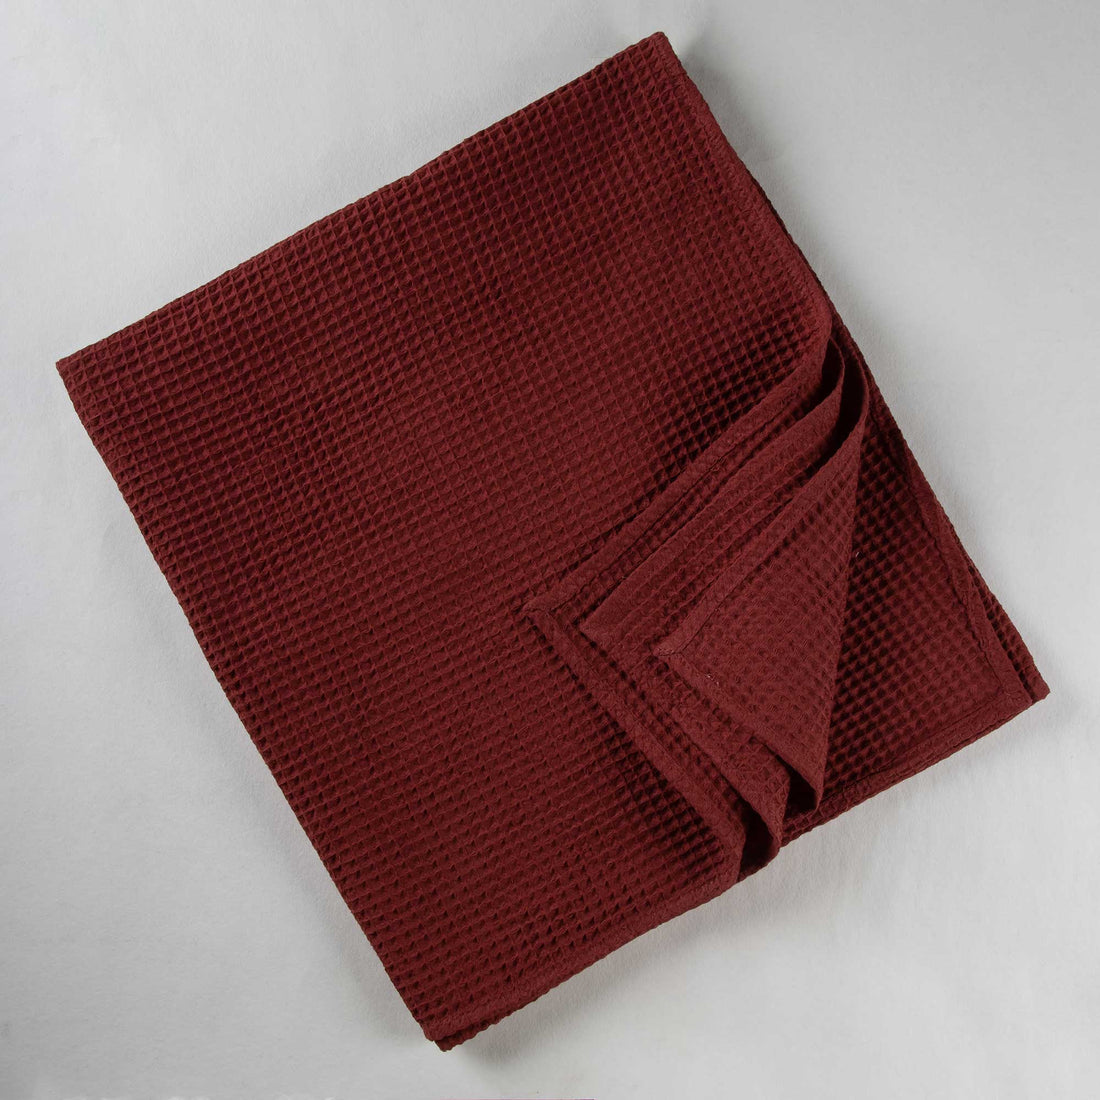 Maroon Soft Cotton Towel and Quick Dry Towels